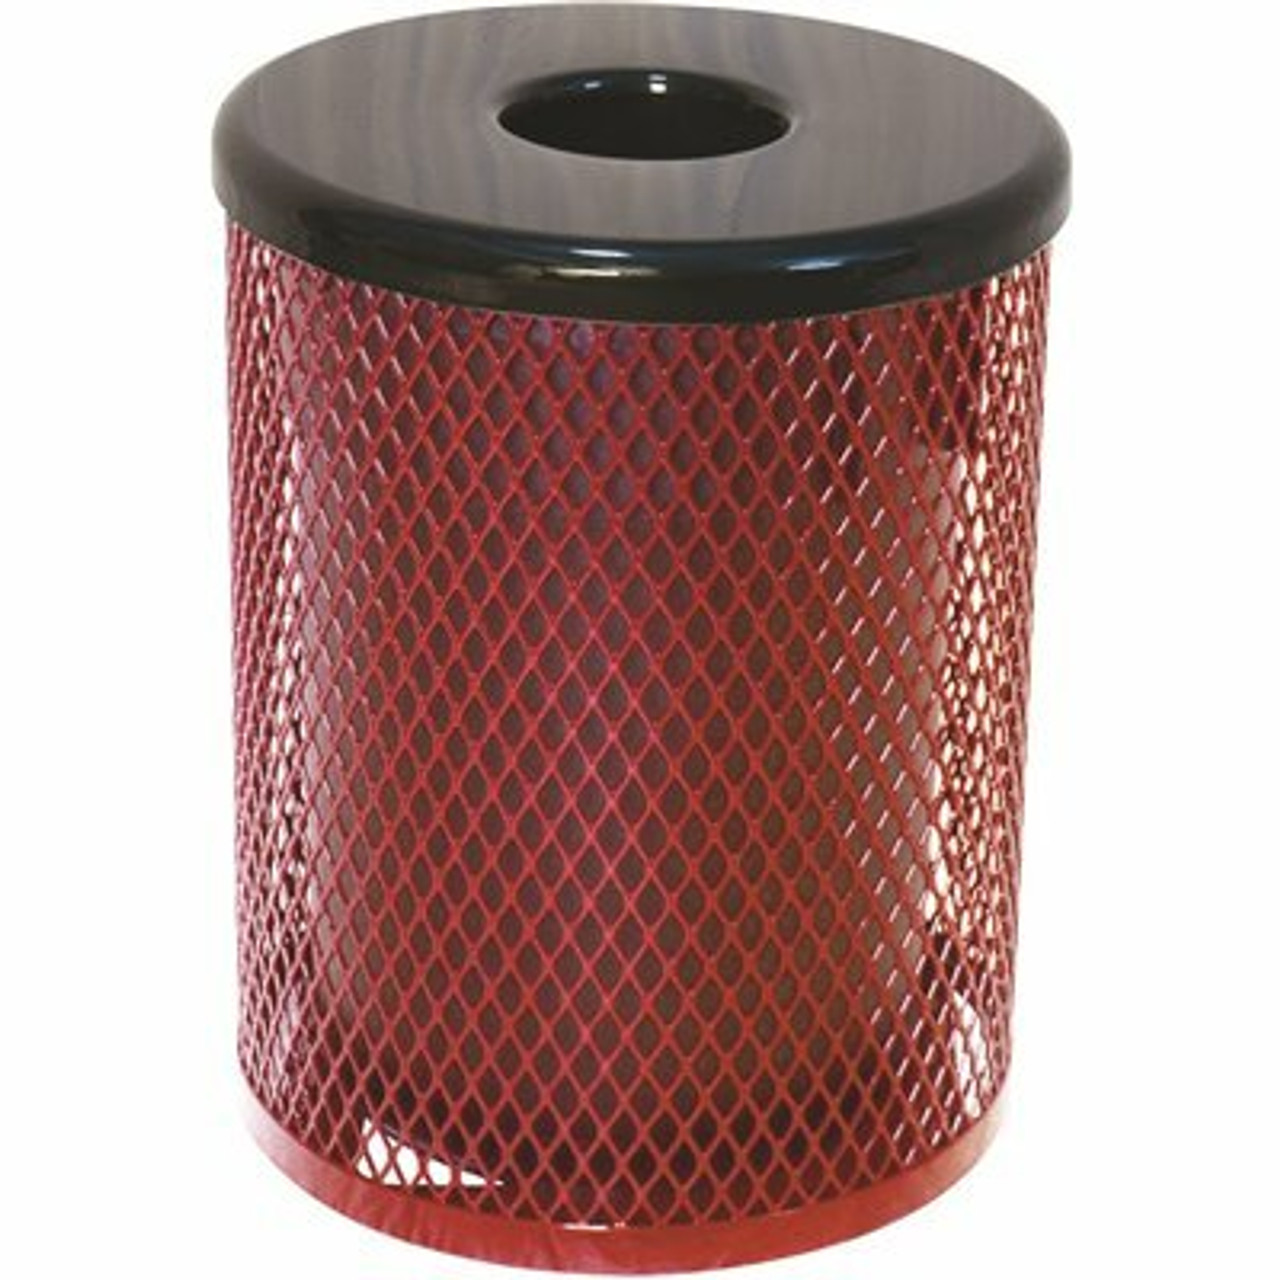 Everest 32 Gal. Red Trash Receptacle With Flat Top